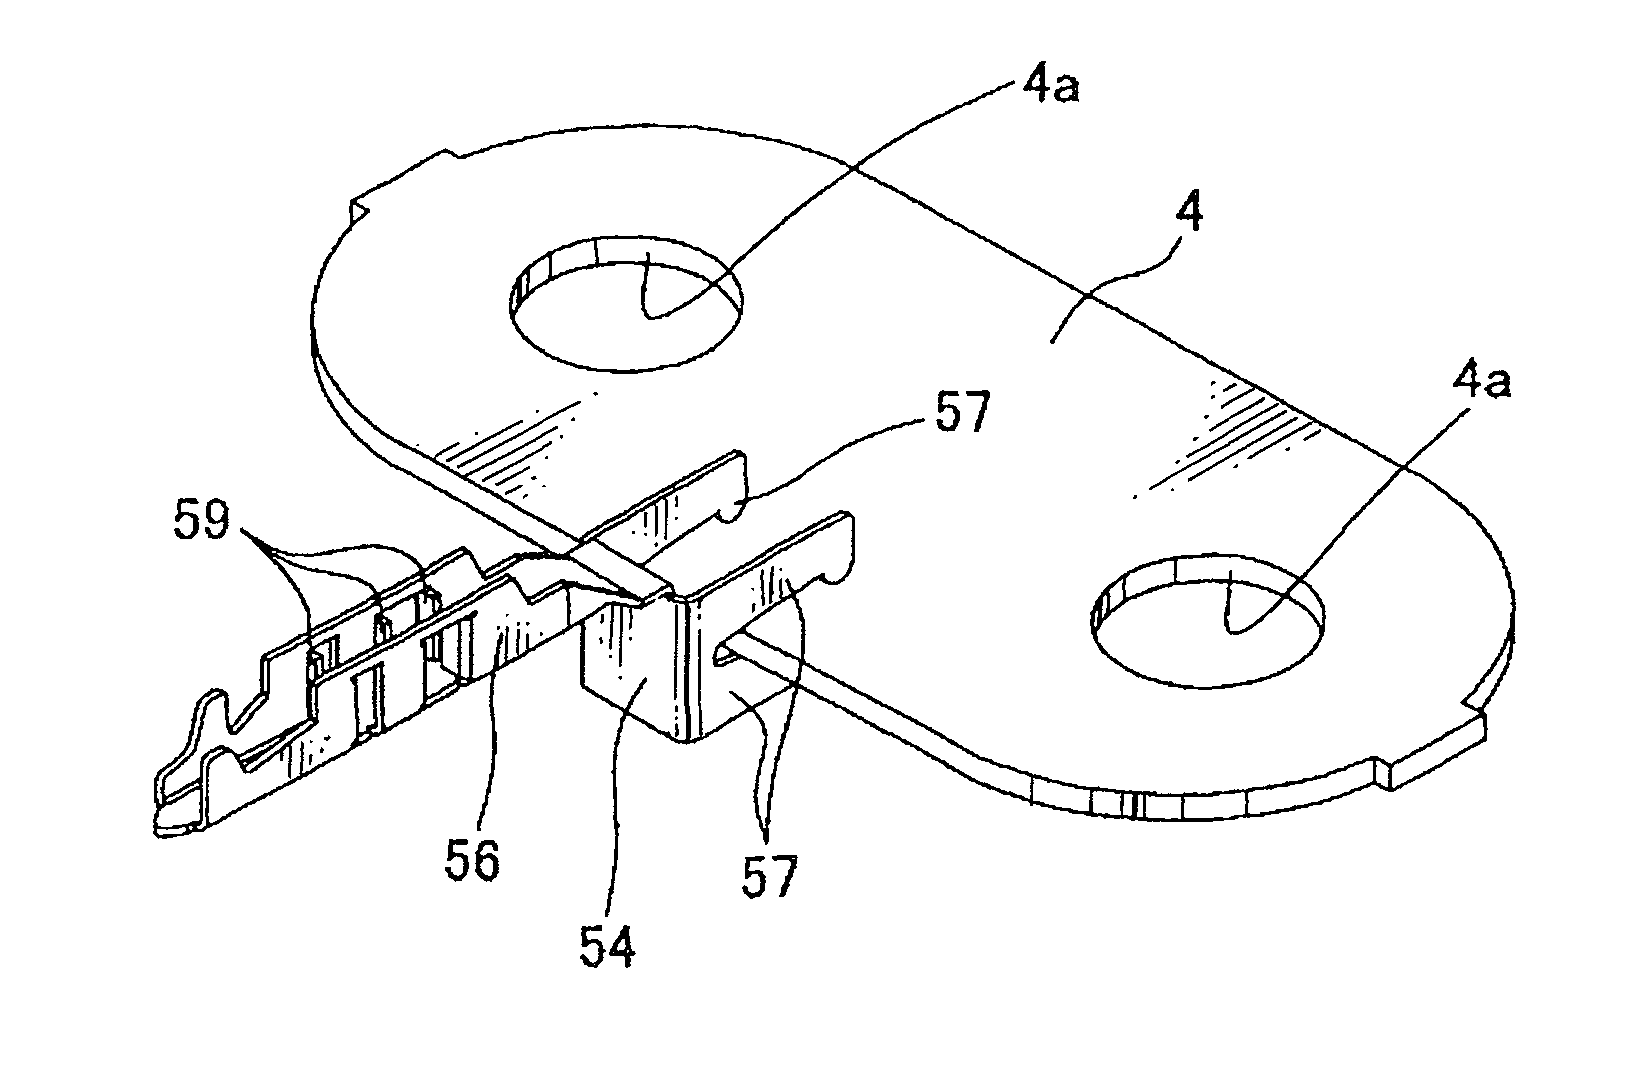 Power-supply device with terminal clipping pieces